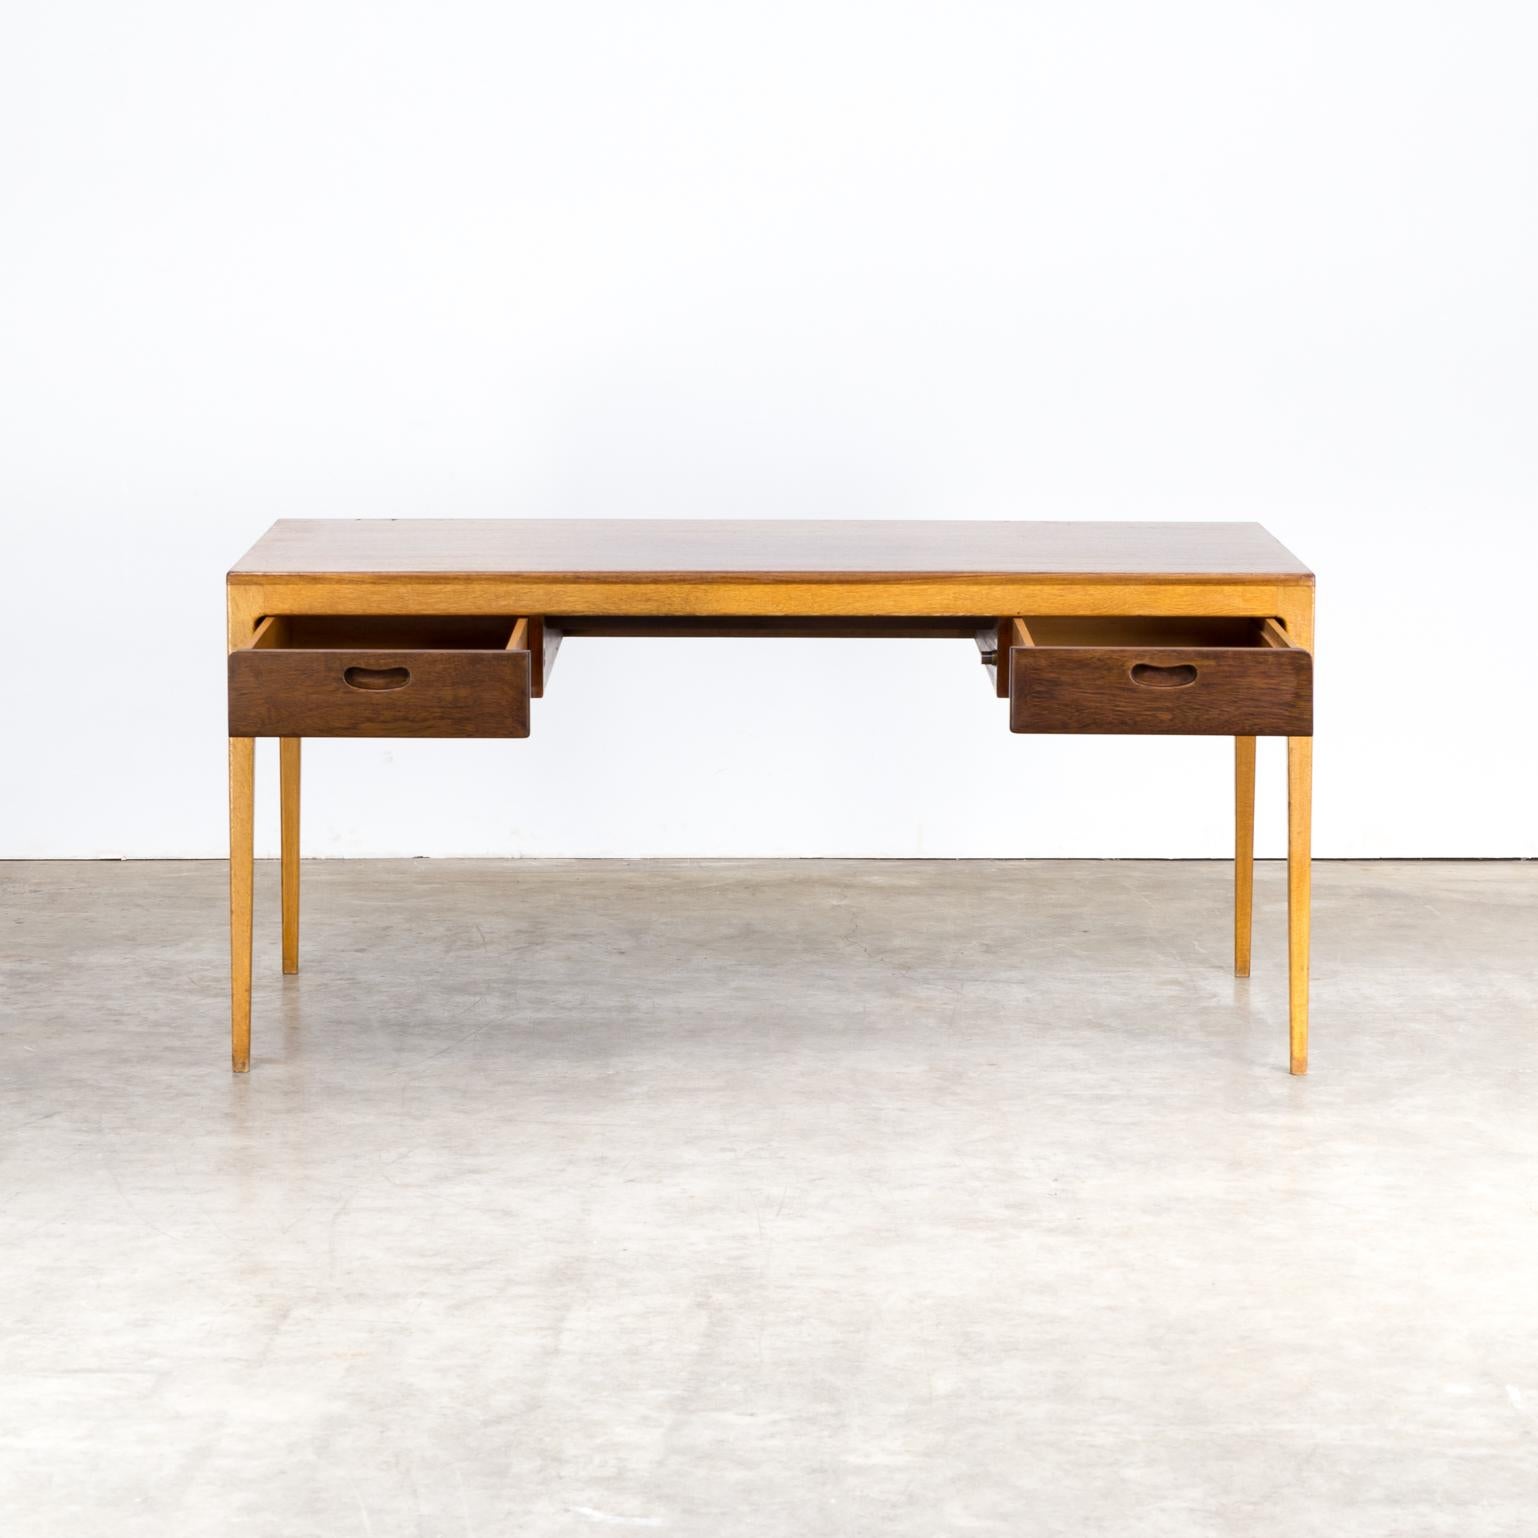 1960s Hartmut Lohmeyer executive writing desk for Wilkhahn. Good condition consistent with age and use.